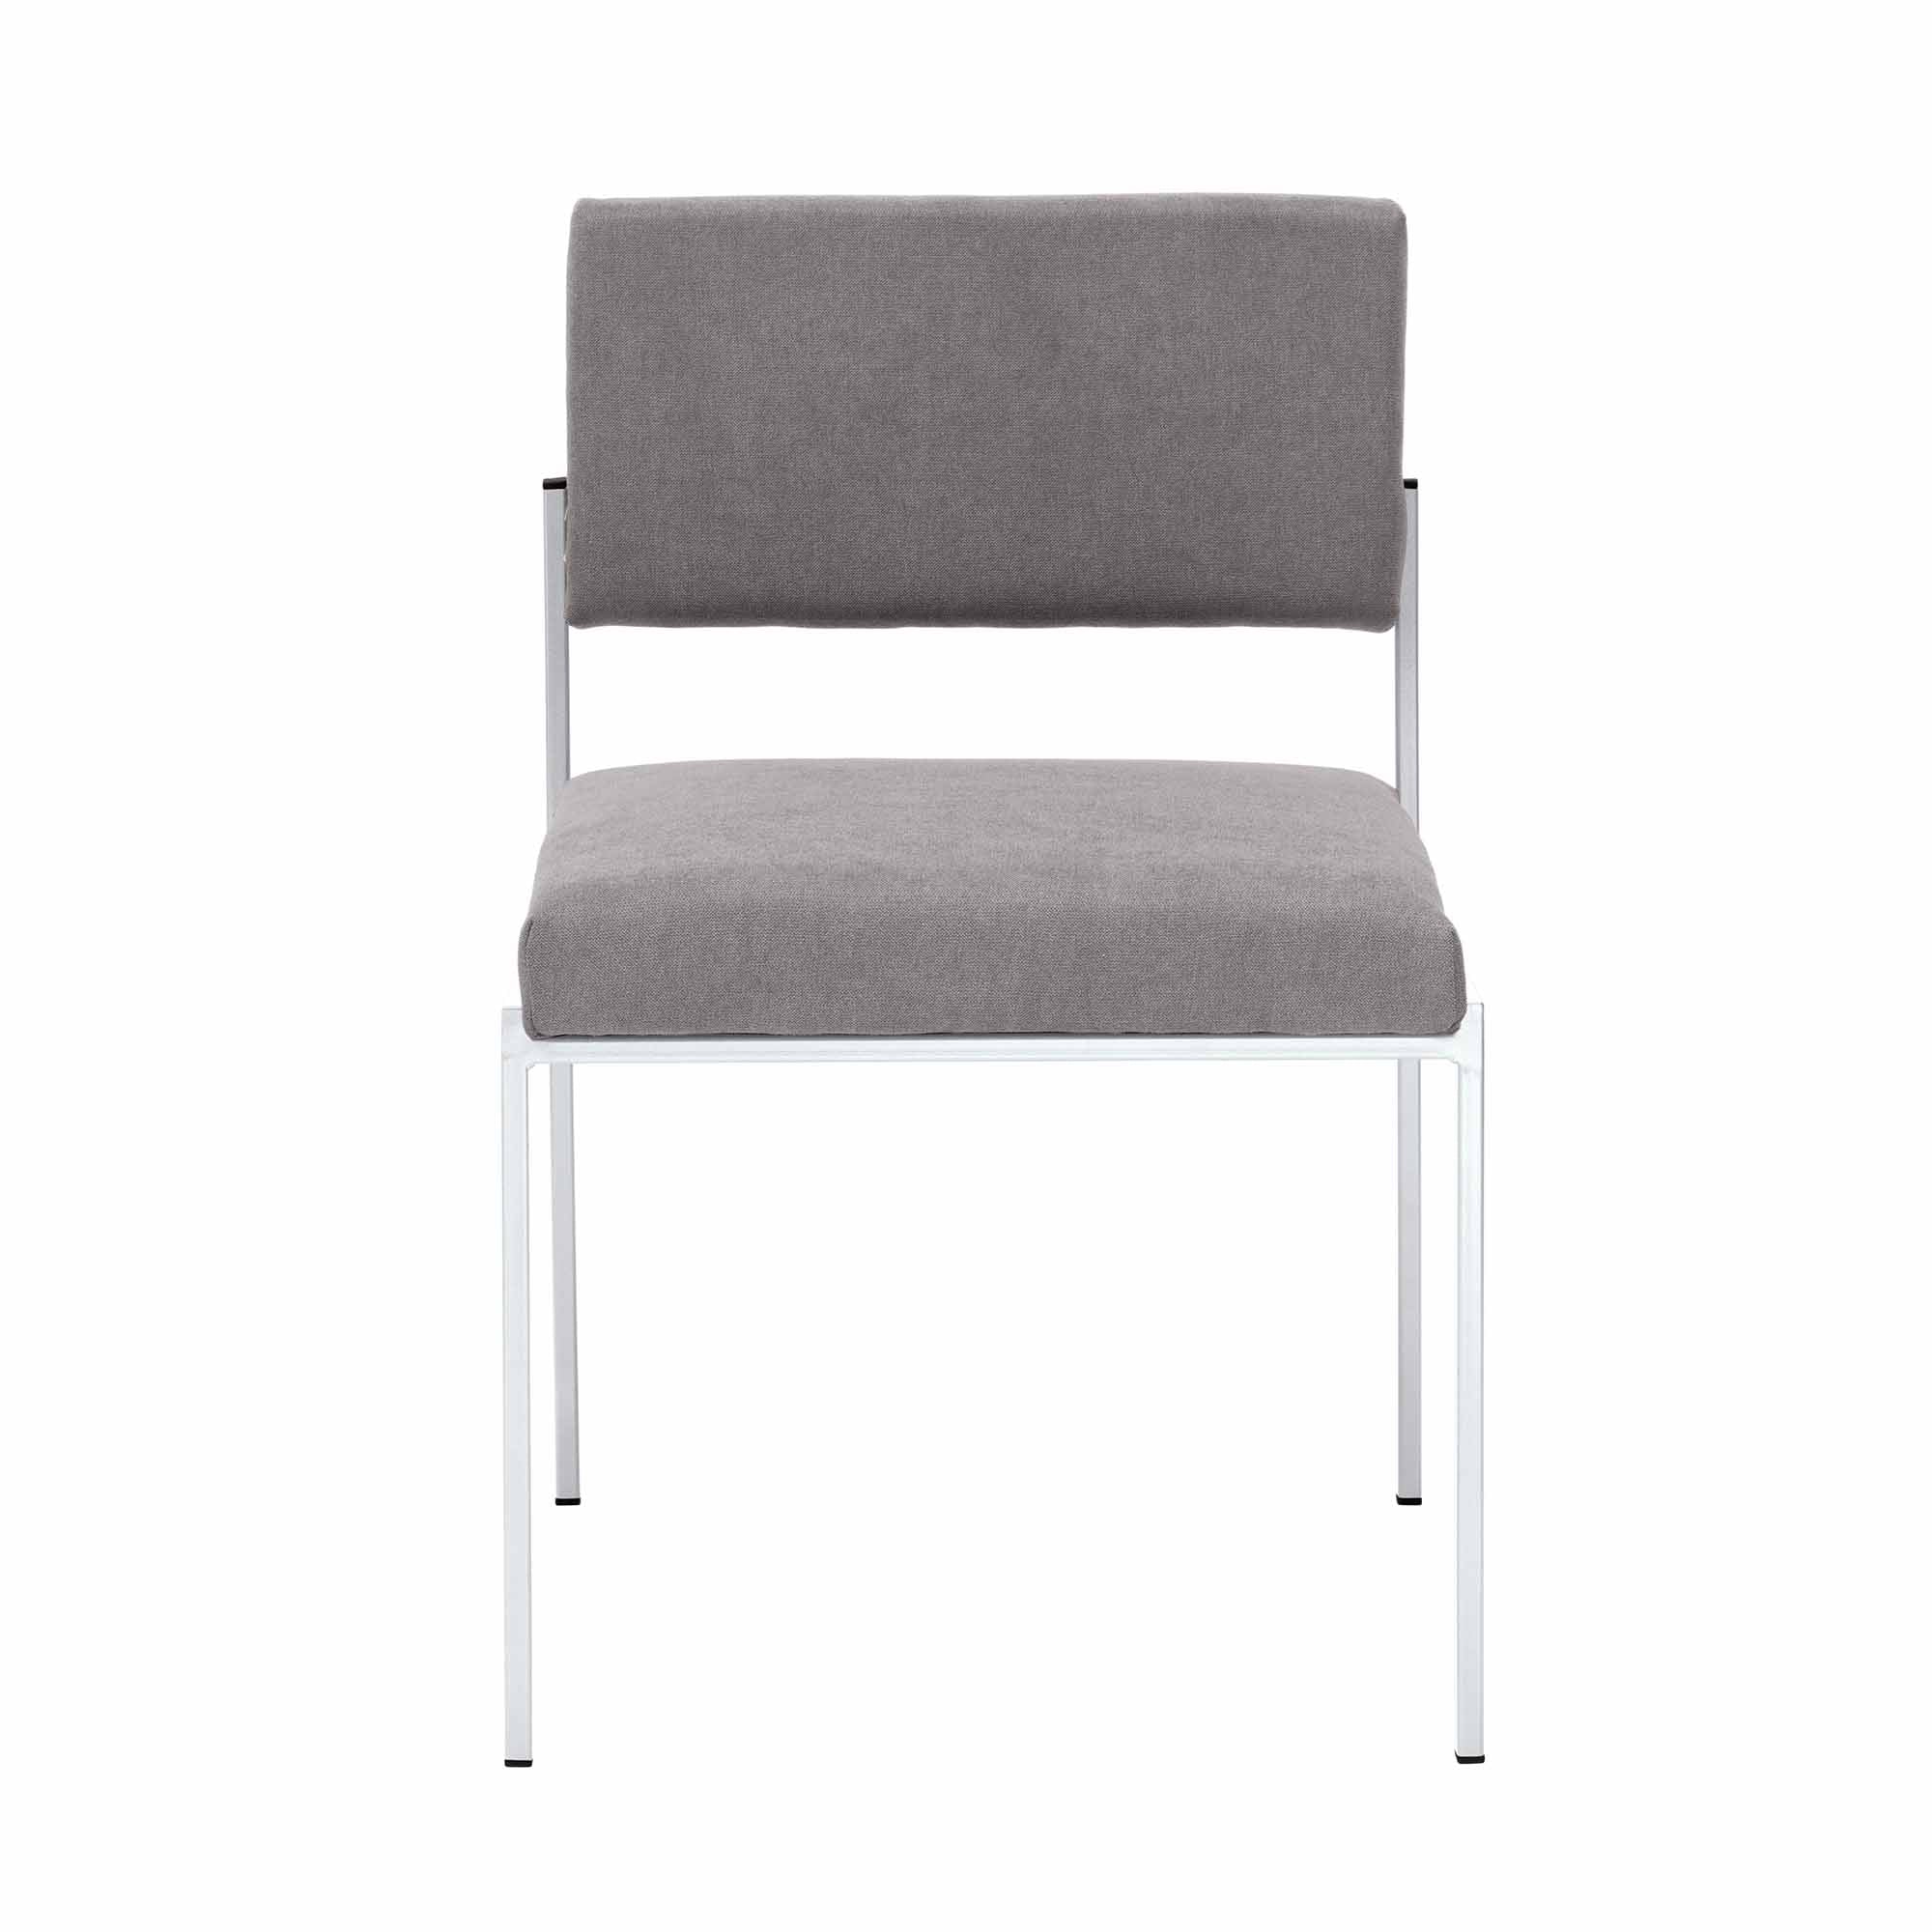  Chair, Powder-Coated Steel Frame, front view grey fabirc, white frame